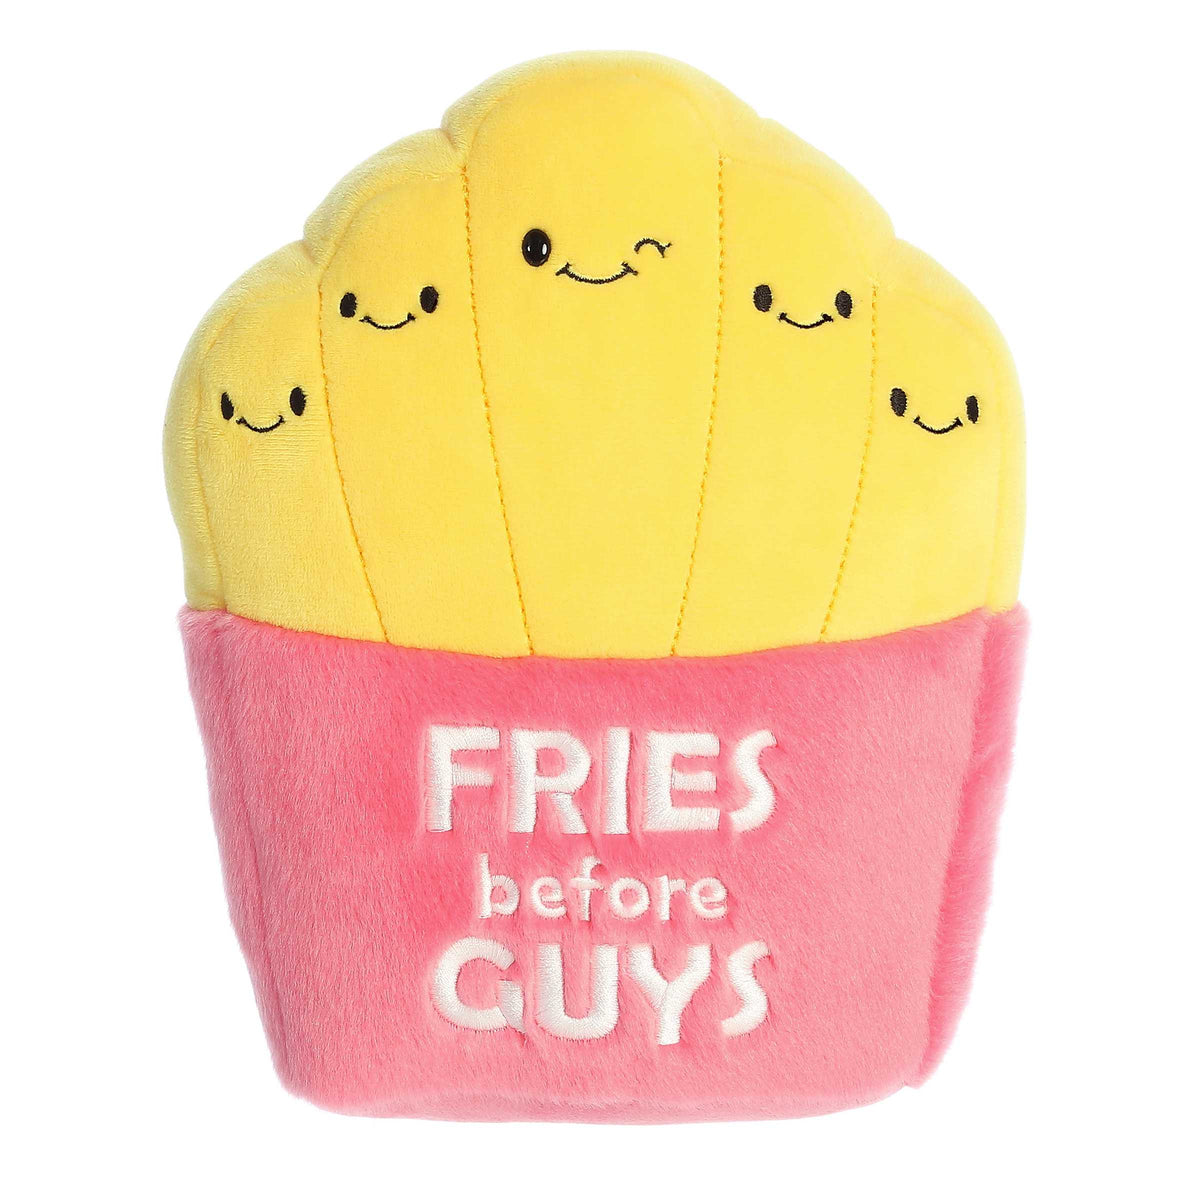 Plush fries in a vibrant red container with 'Fries Before Guys' embroidery, featuring smiling expressions and playful fries